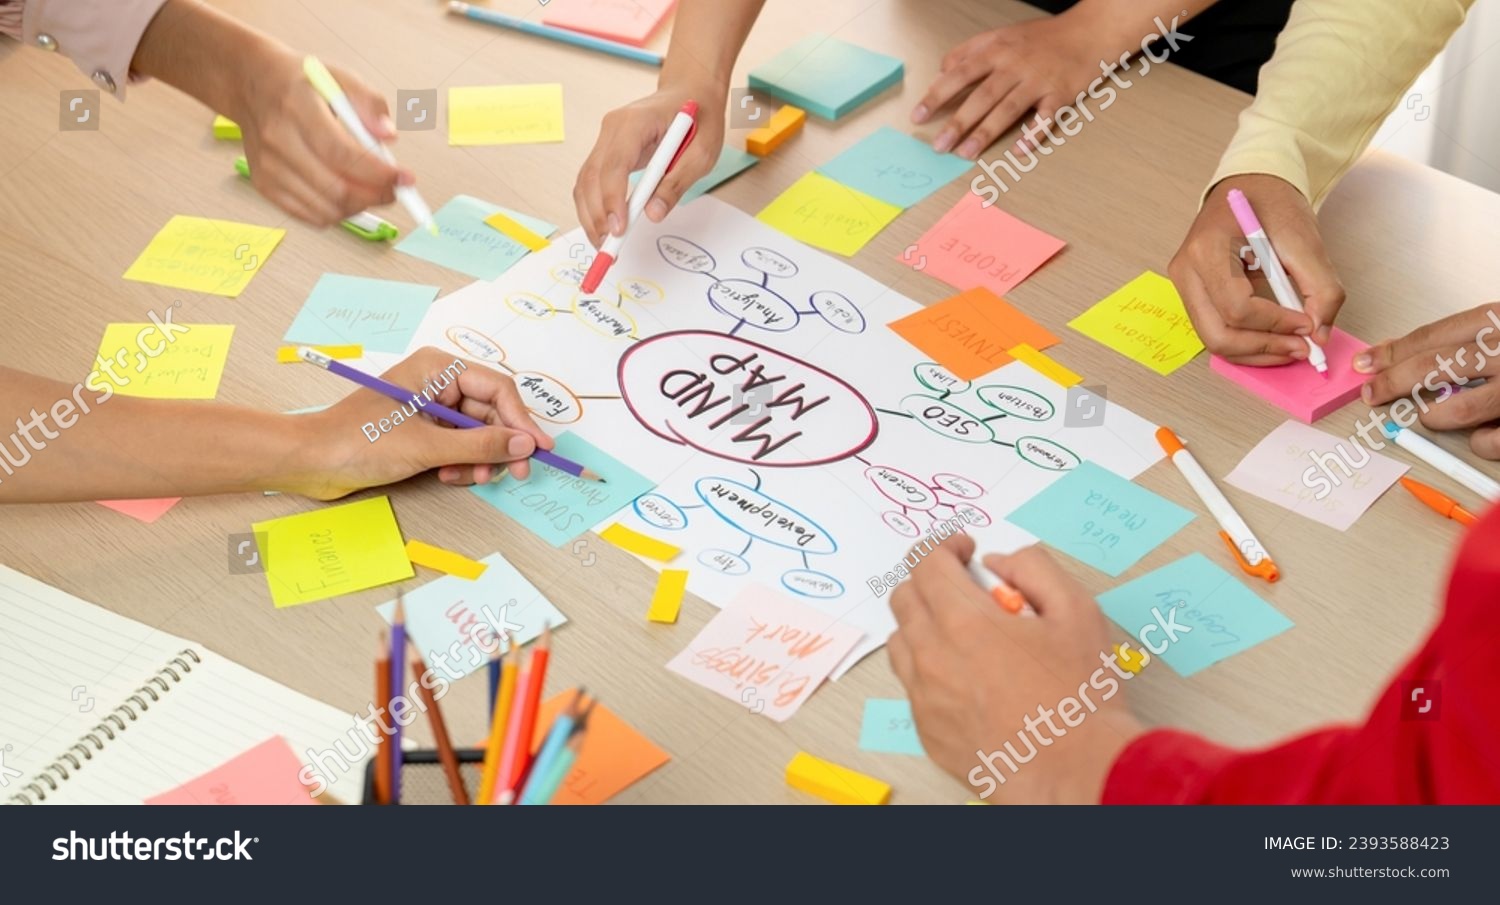 Professional startup group share creative marketing idea by using mind map. Young skilled business people brainstorm business plan while writing sticky notes. Focus on hand. Closeup. Variegated. #2393588423